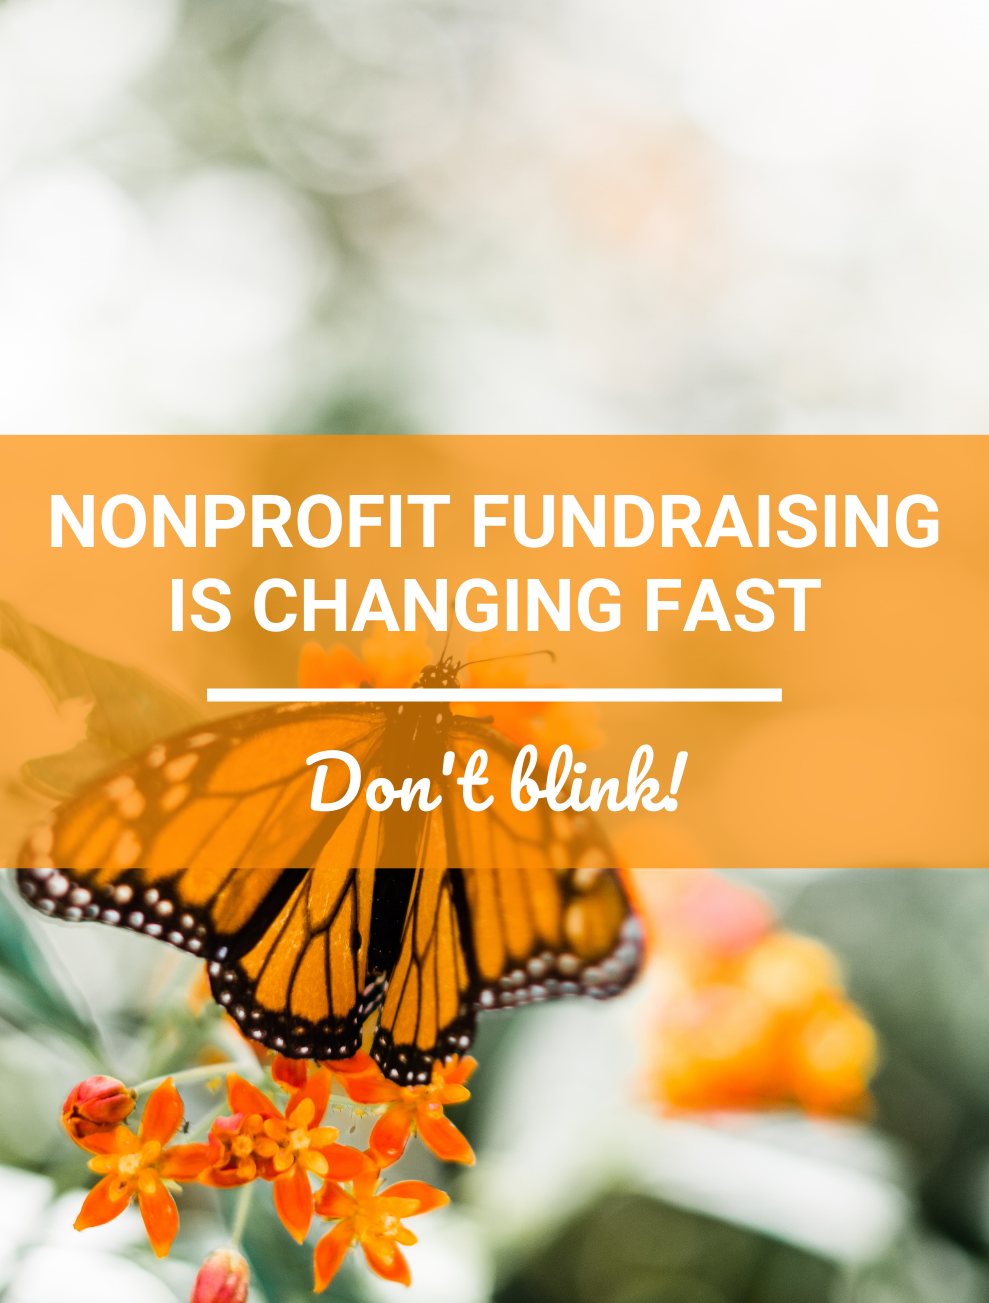 Nonprofit fundraising is changing